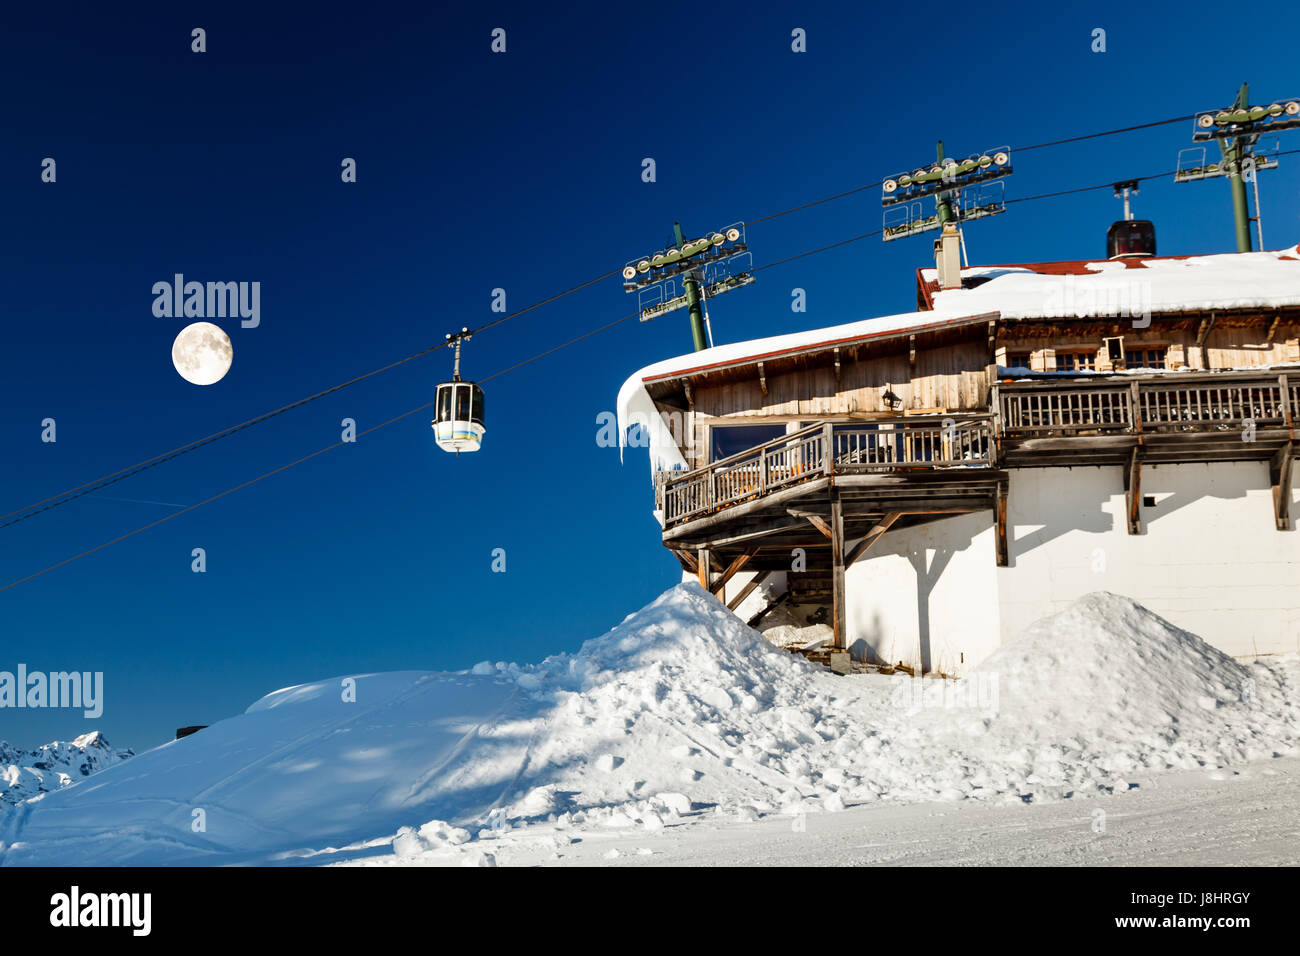 Full Moon and Gondola on Upper Cable Lift Station in French Alps, Megeve Stock Photo